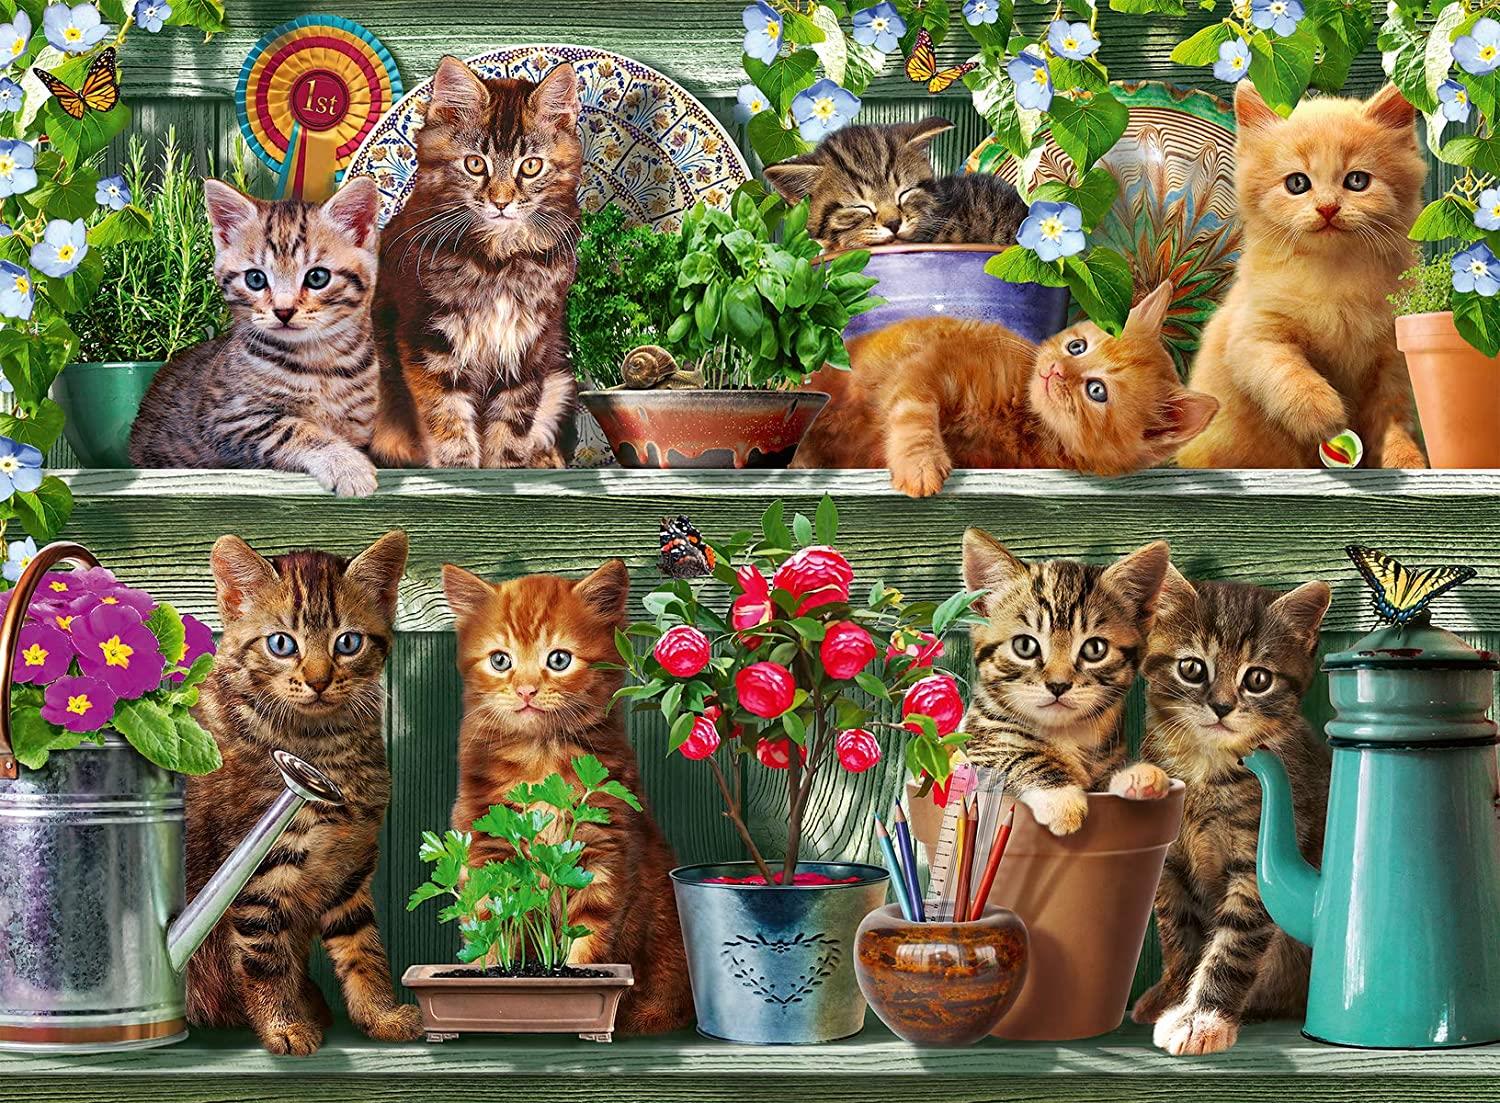 Ravensburger Cats on the Shelf Jigsaw Puzzle (500 Pieces)